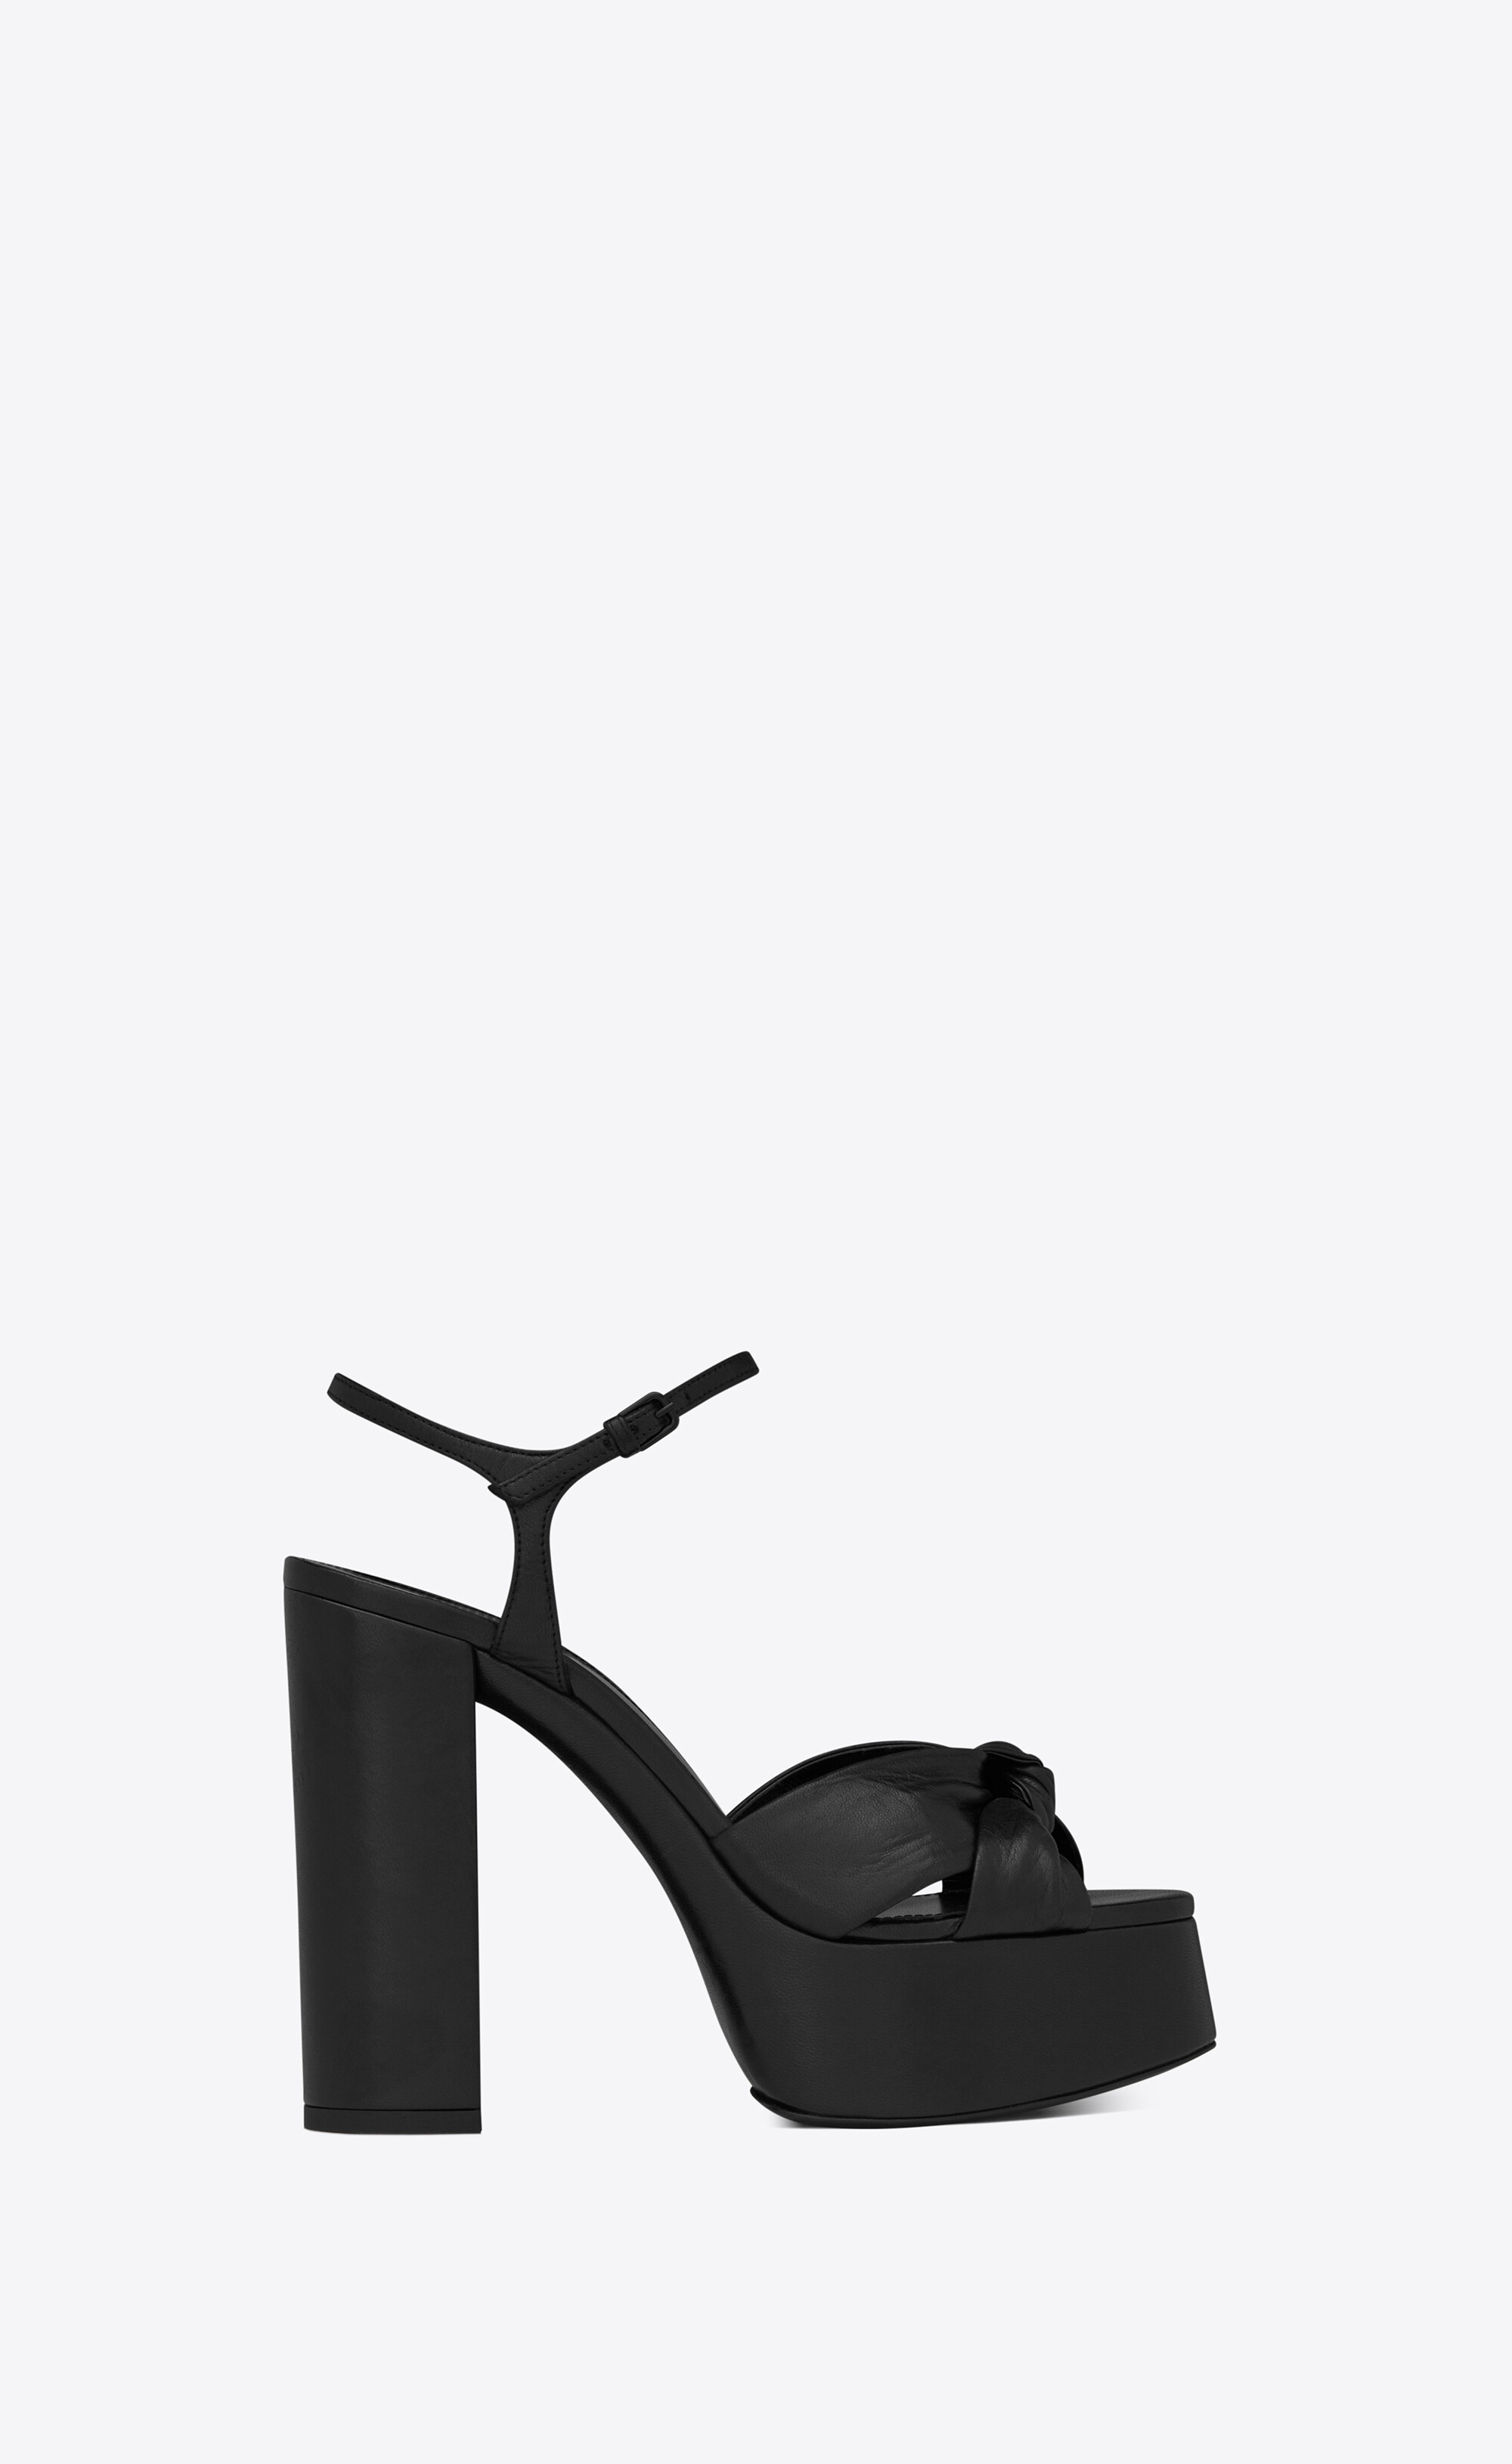 inference Moment time table BIANCA Platform sandals in smooth leather | Saint Laurent | YSL.com